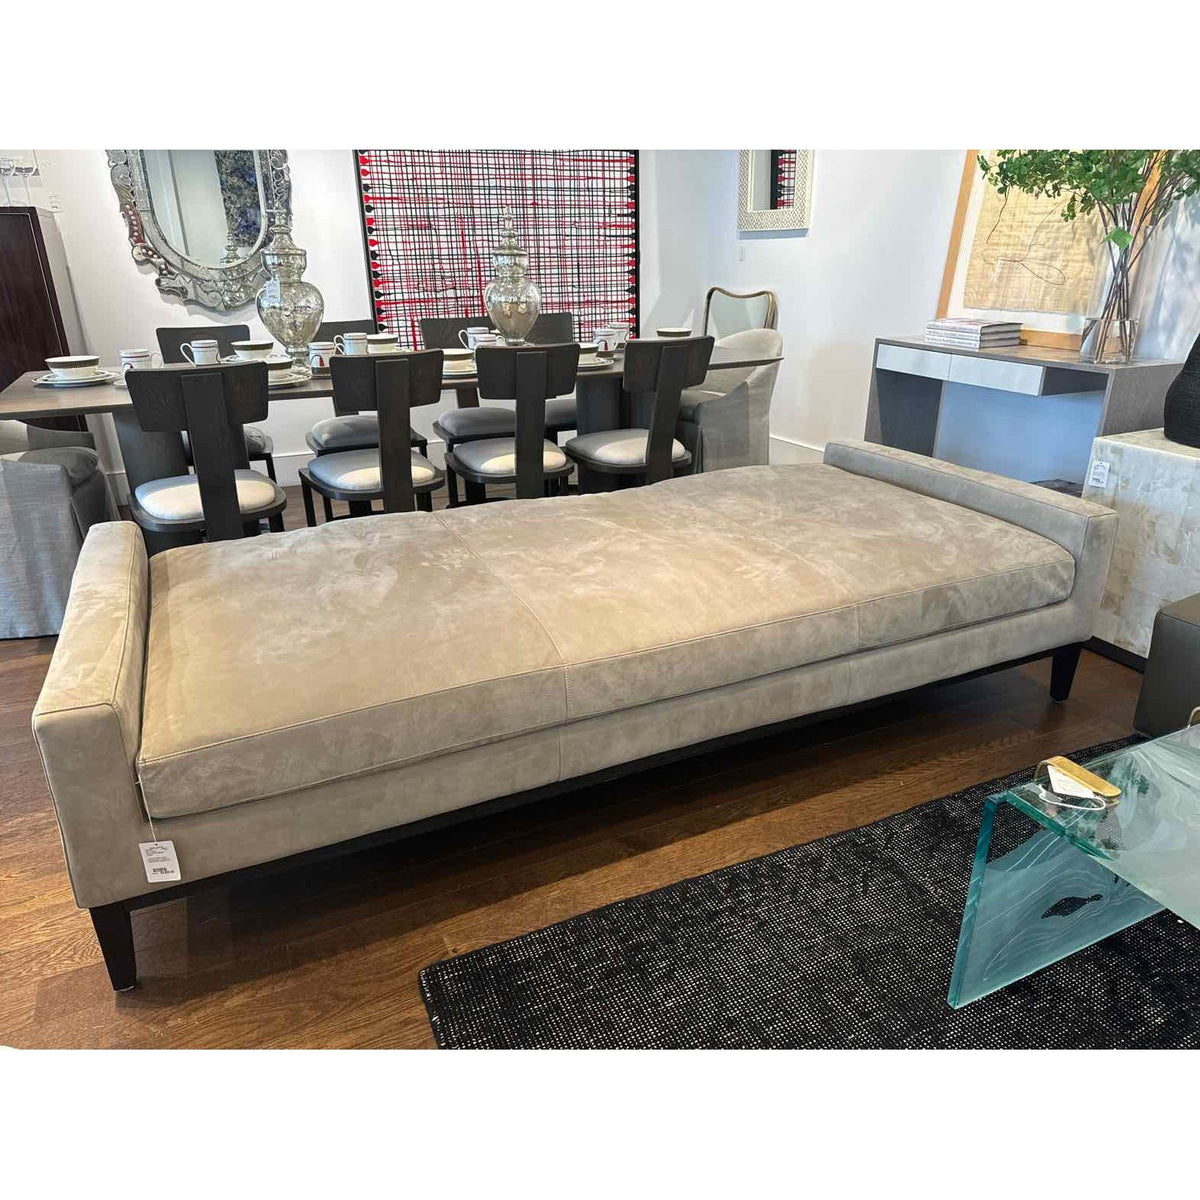 Custom RH Italia Leather Bench/Daybed - in Suade w/ Oak Base 92"Lx40"Wx22.5"H